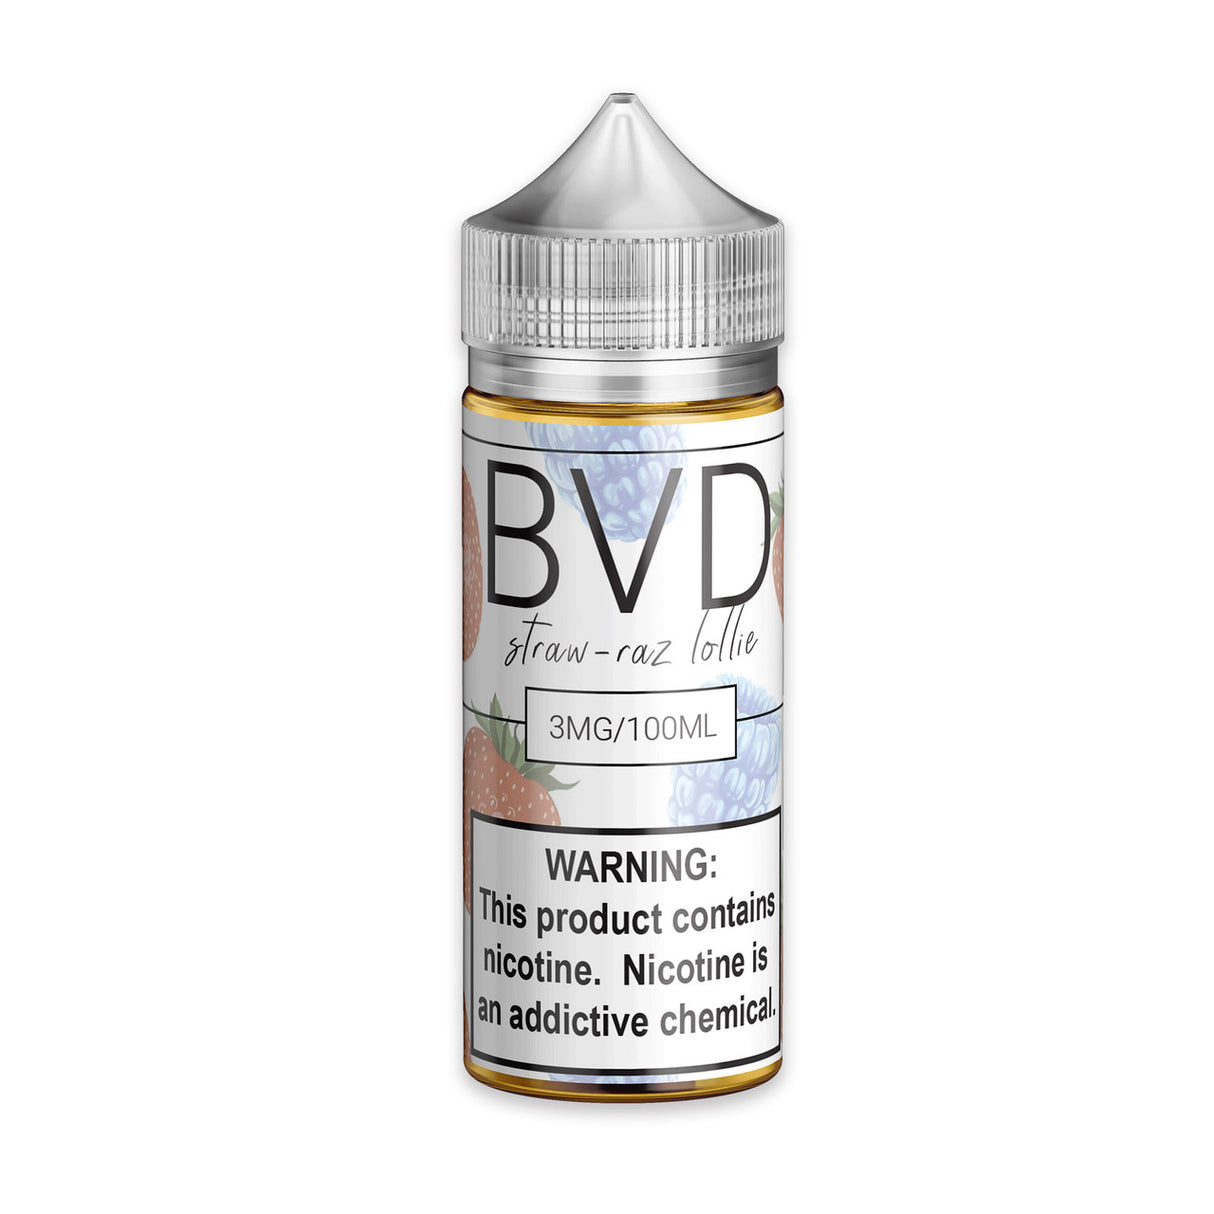 BVD strawberry candy ejuice on sale online